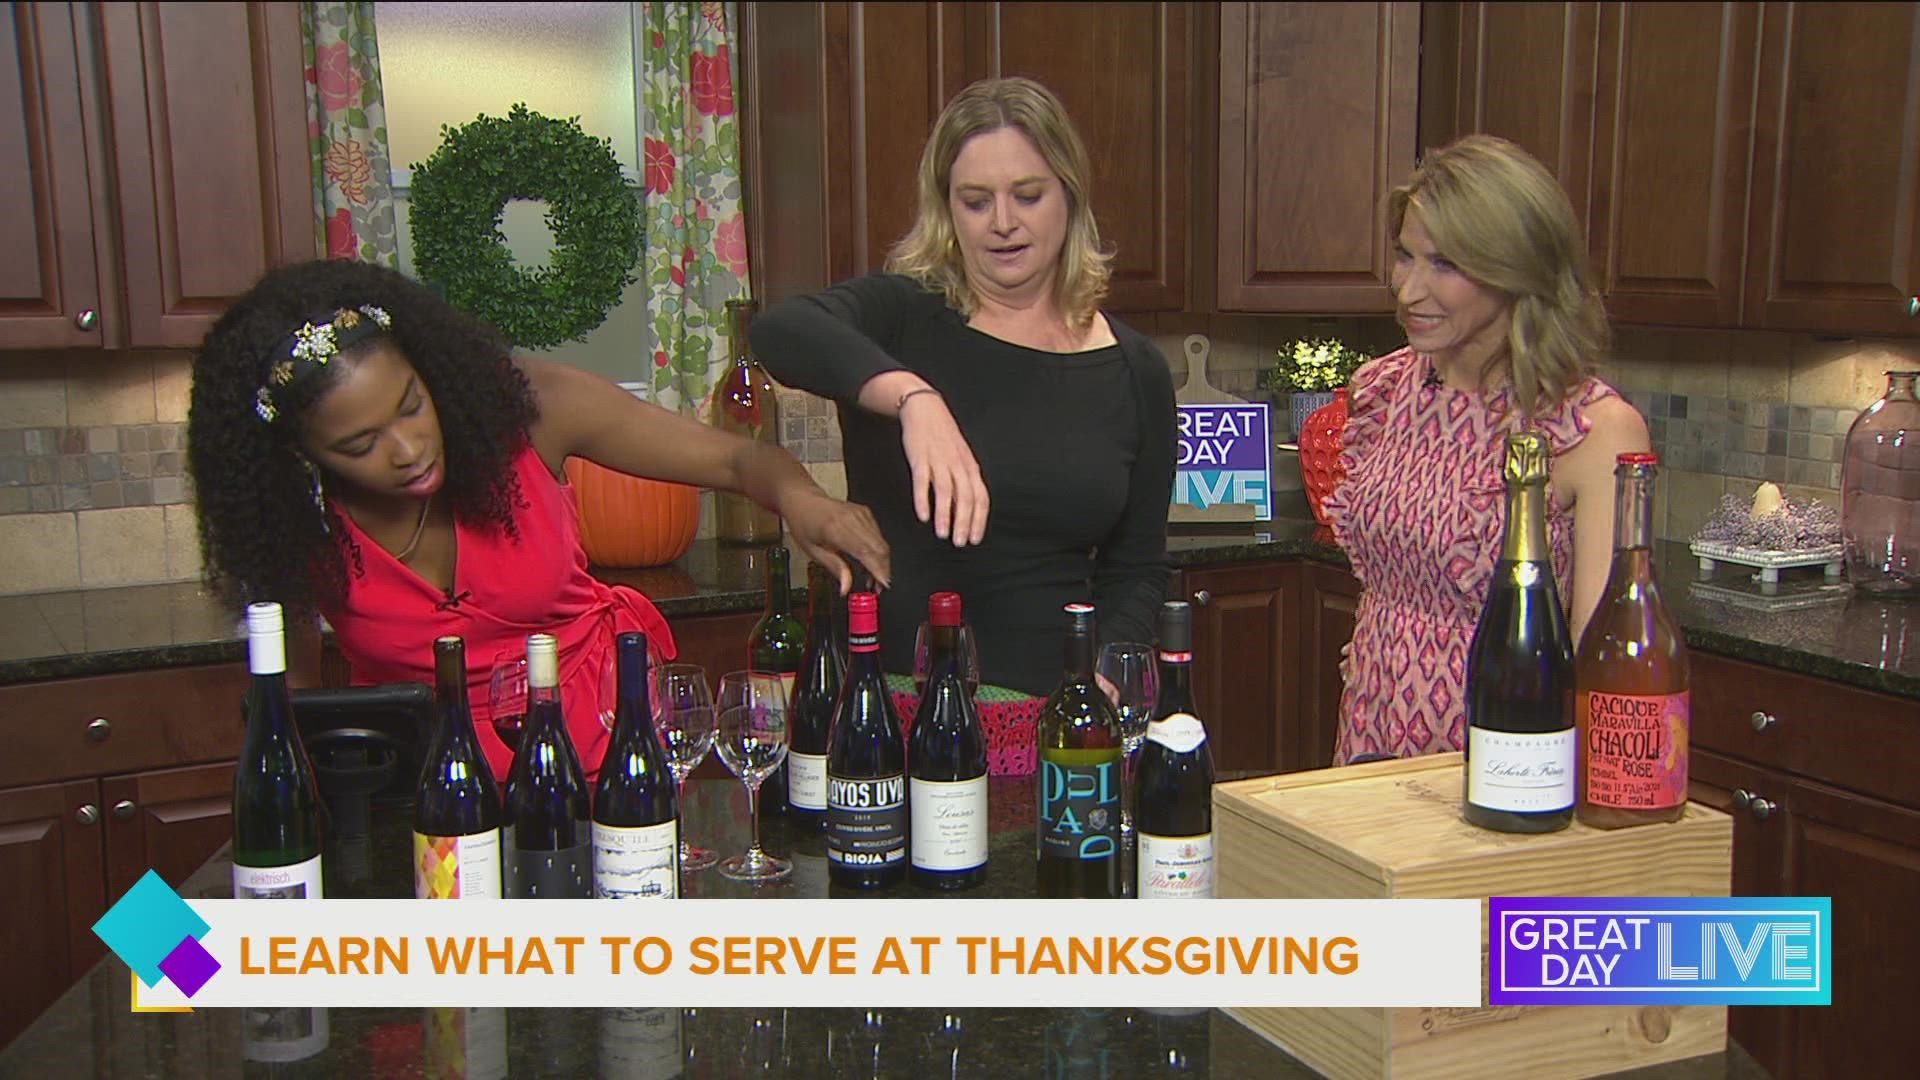 Find the best wines for Thanksgiving at Cru Cellars upcoming wine fest